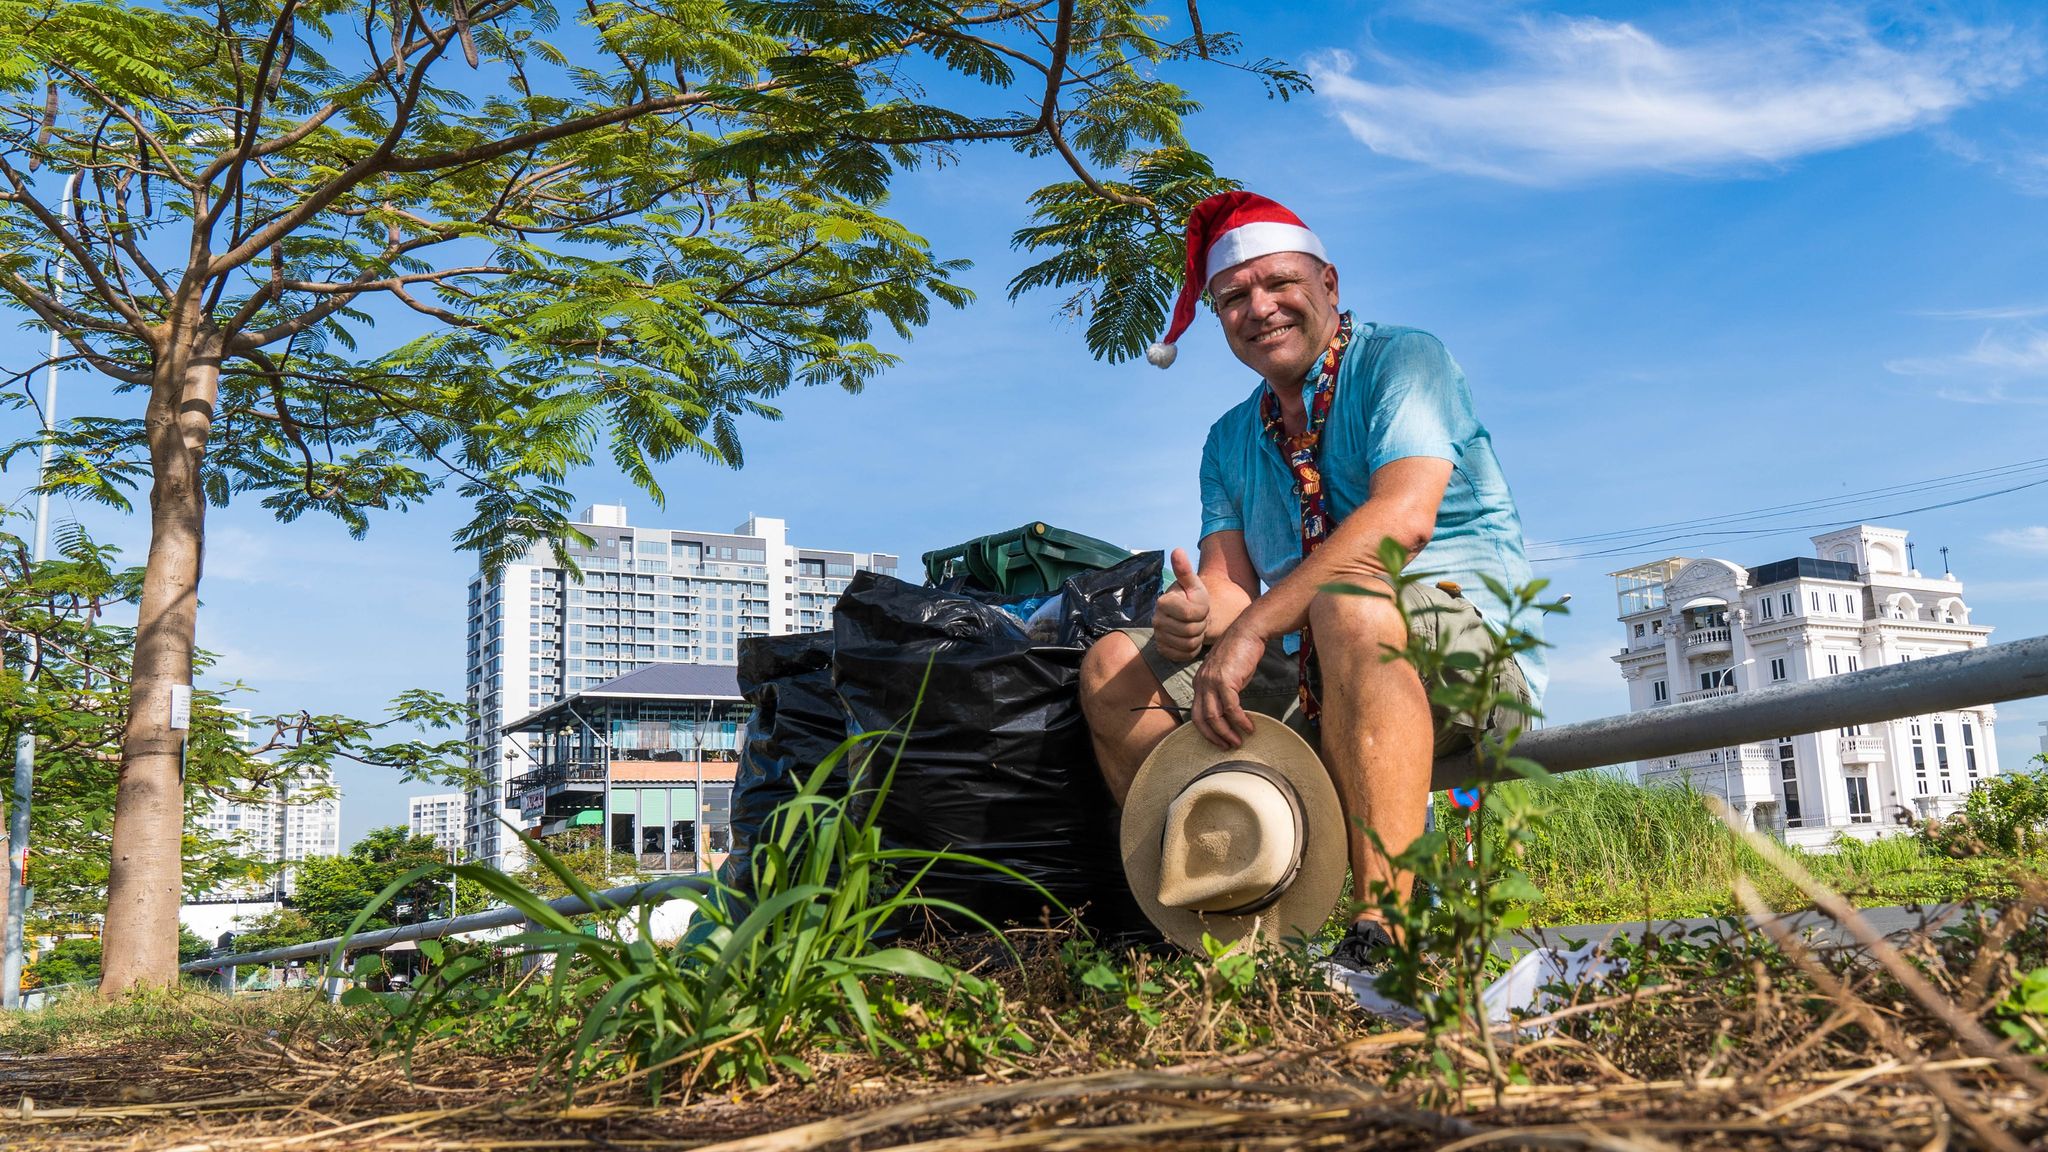 John Petter Klovstad from Norway poses for a picture with a bag of rubbish he picked up during his morning jogging routine in December in Ho Chi Minh City. Photo: Supplied